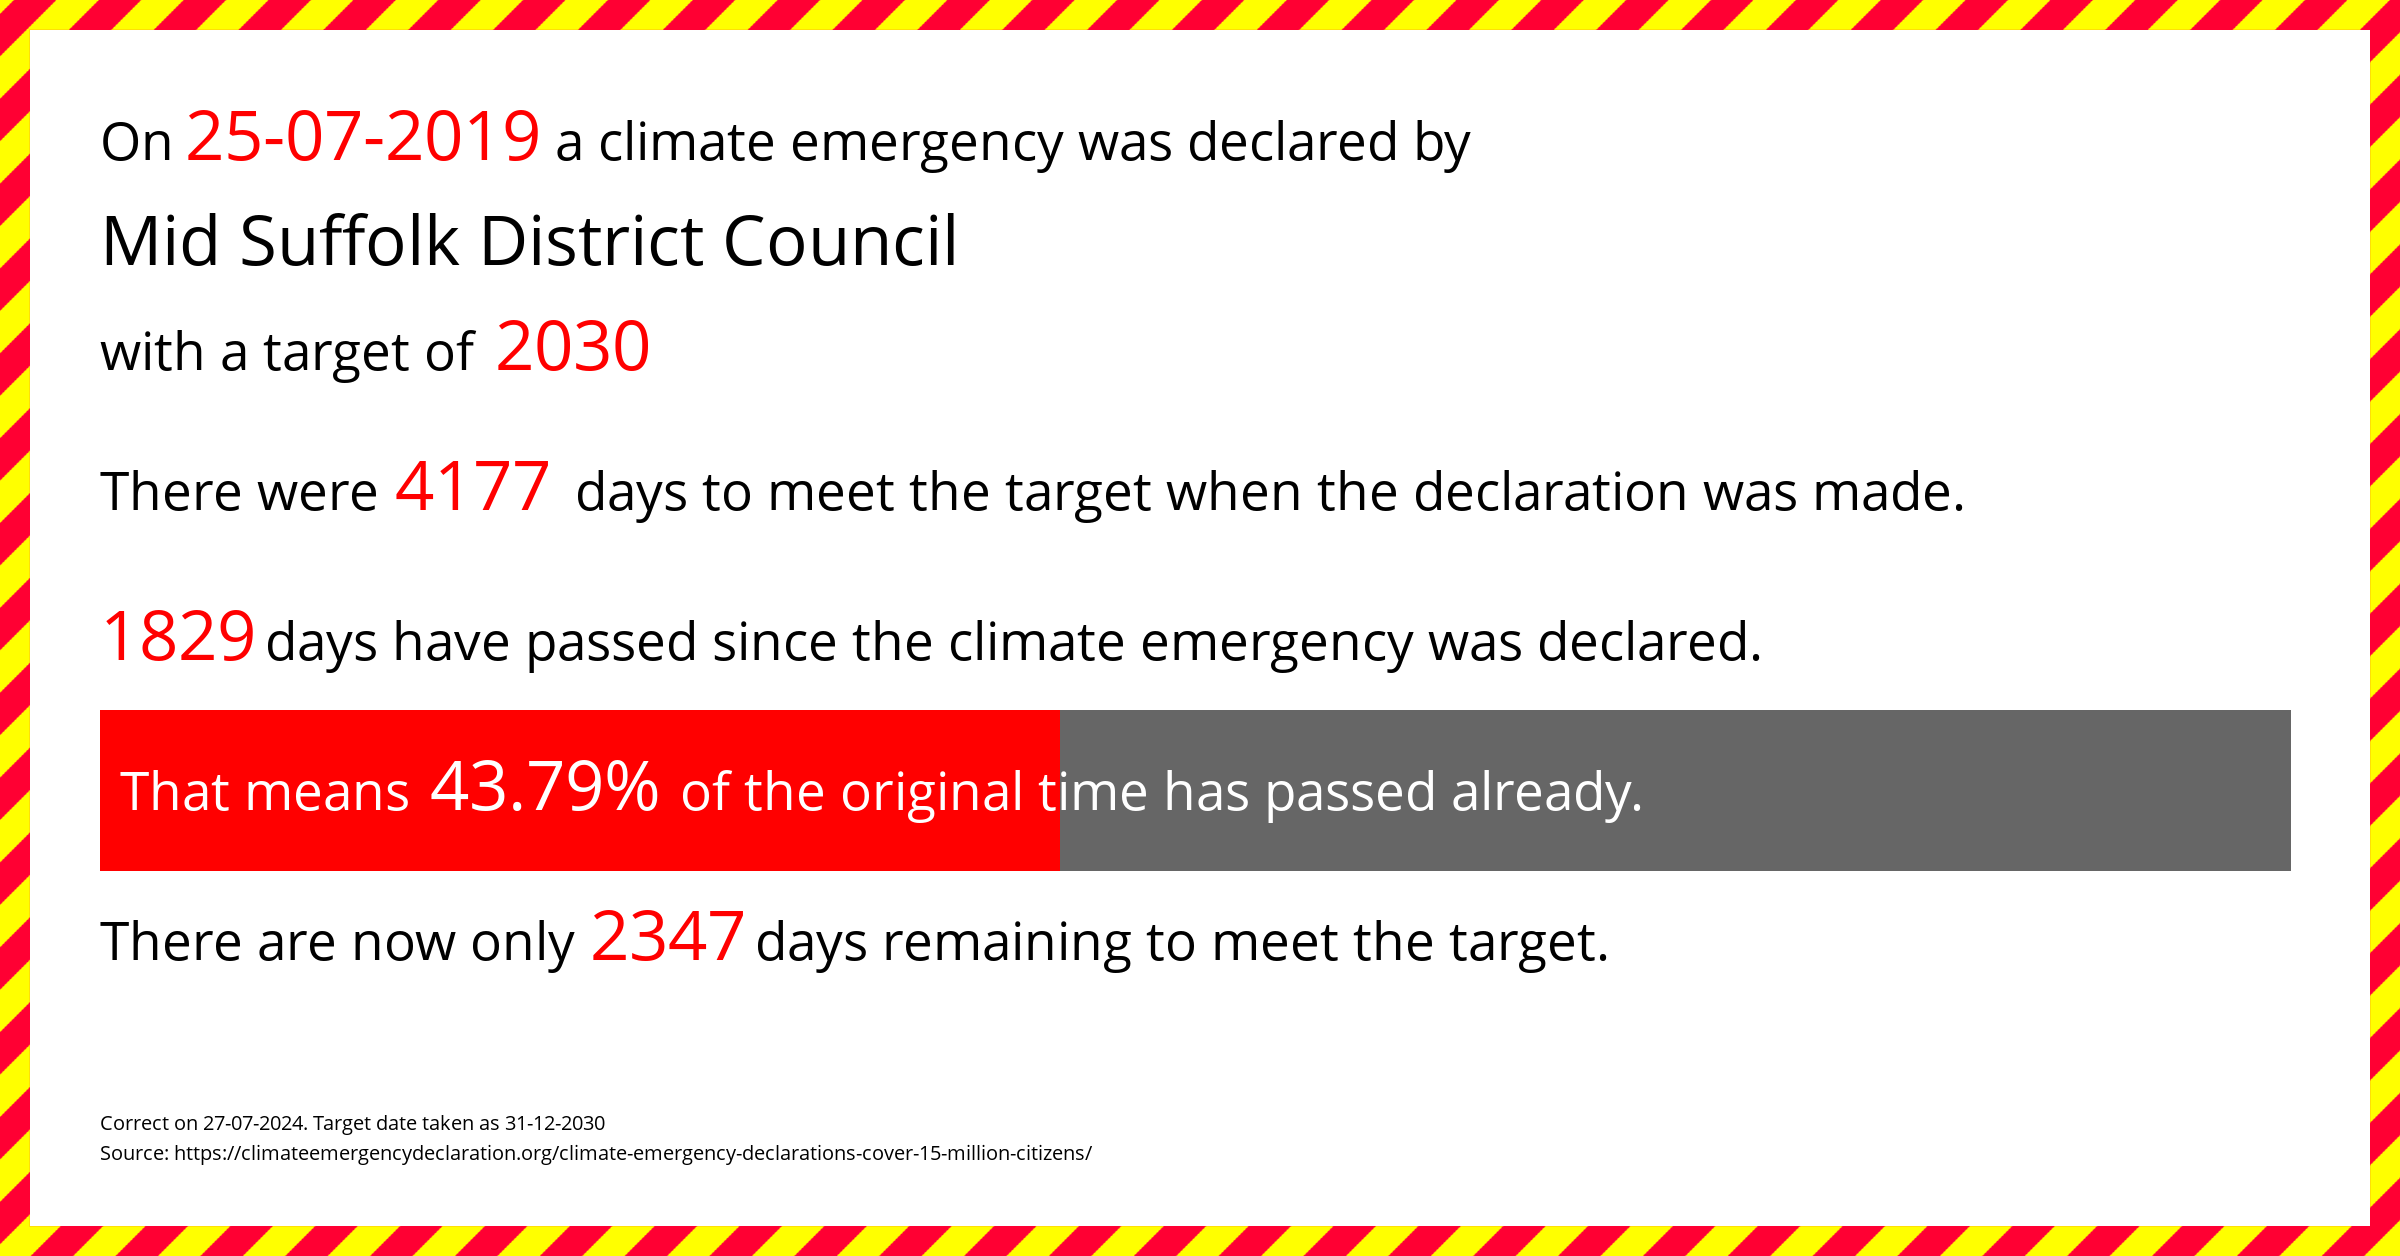 Mid Suffolk District Council declared a Climate emergency on Thursday 25th July 2019, with a target of 2030.